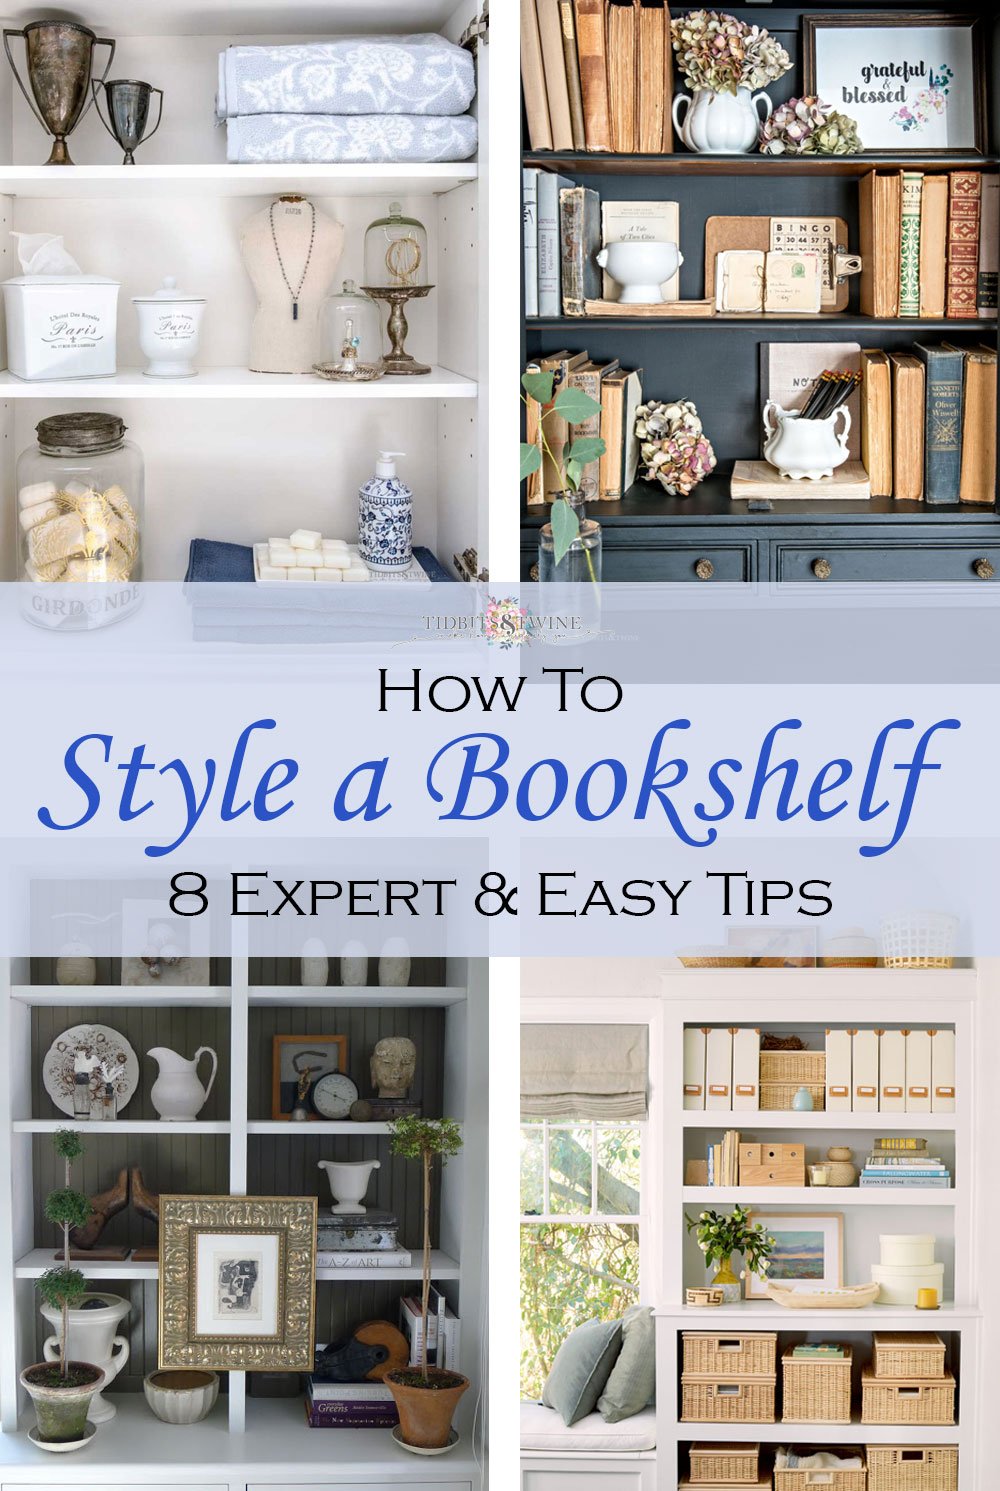 How to Style a Bookshelf – 8 Expert & Easy Tips